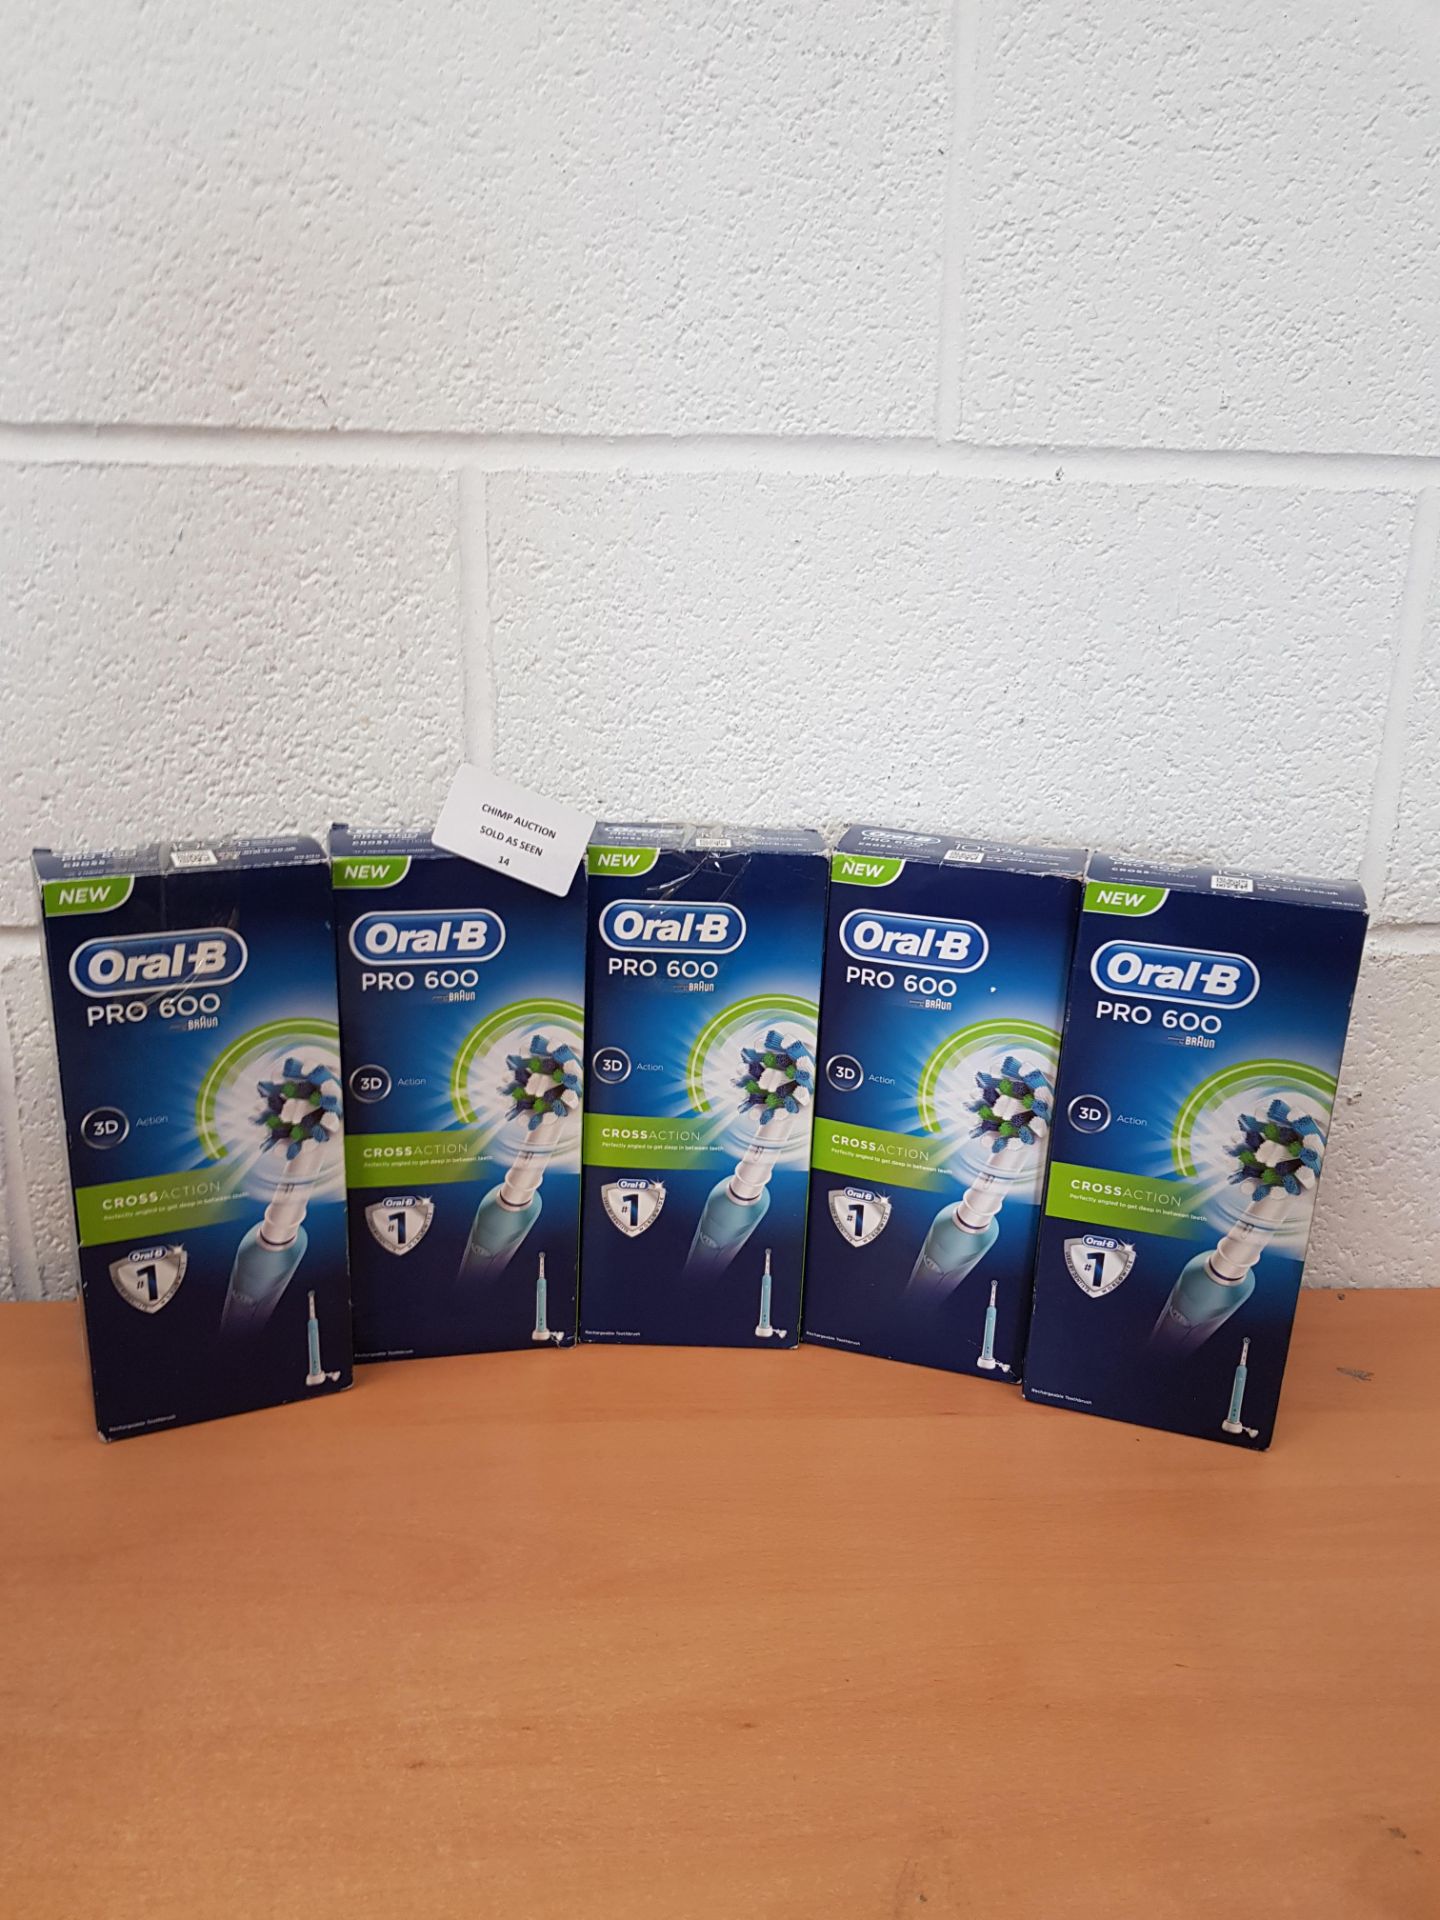 Joblot of 5X Oral-B Braun Pro 600 3D Action electric toothbrushes RRP Value £250.